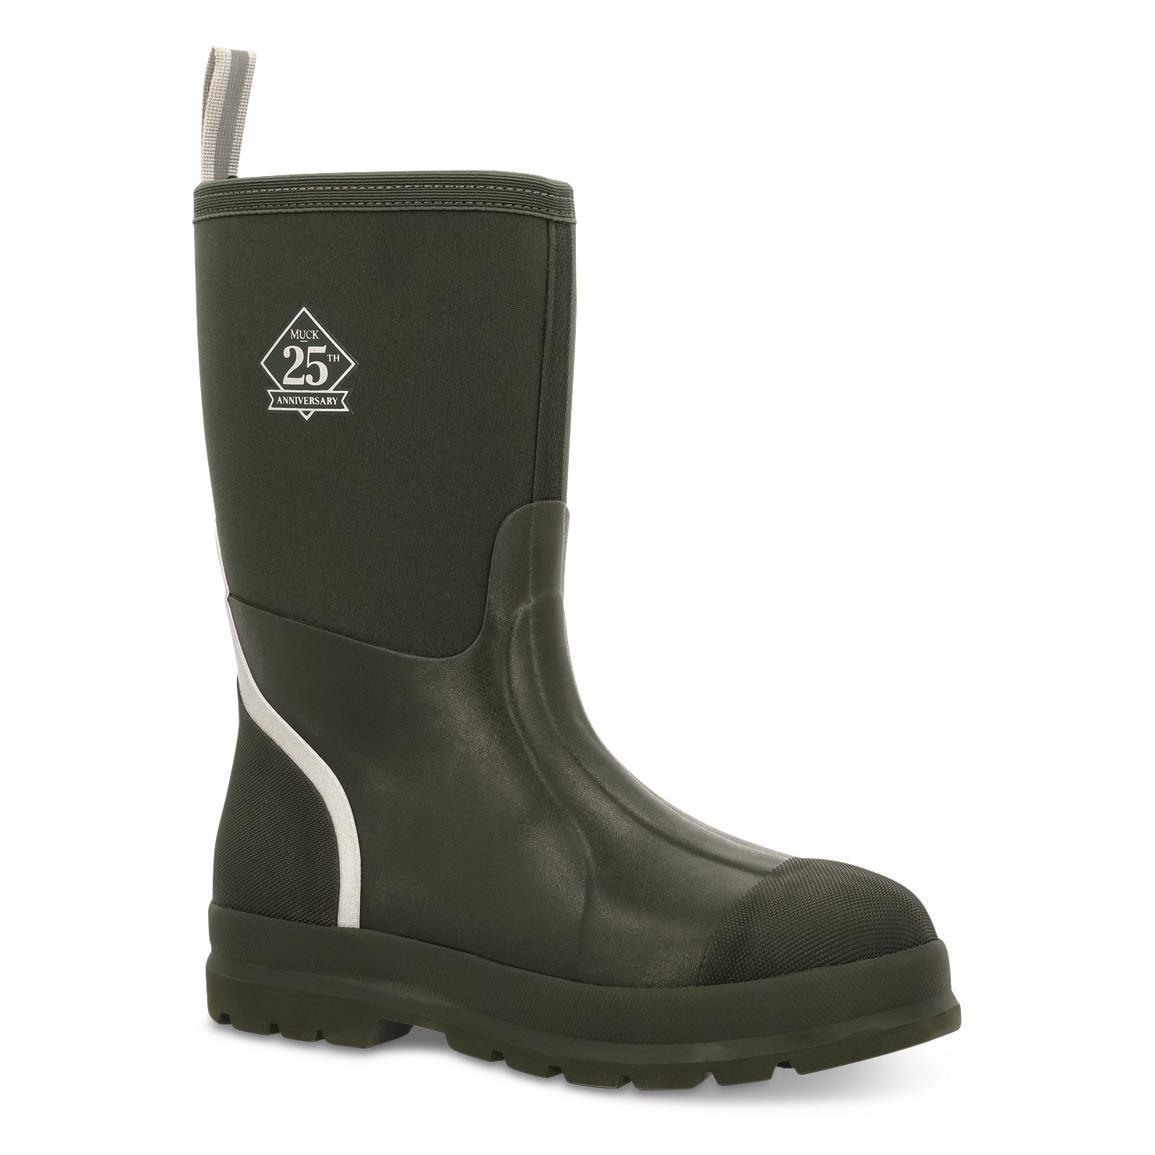 Muck Men's 25th Anniversary Chore Mid Rubber Boots, Green/silver